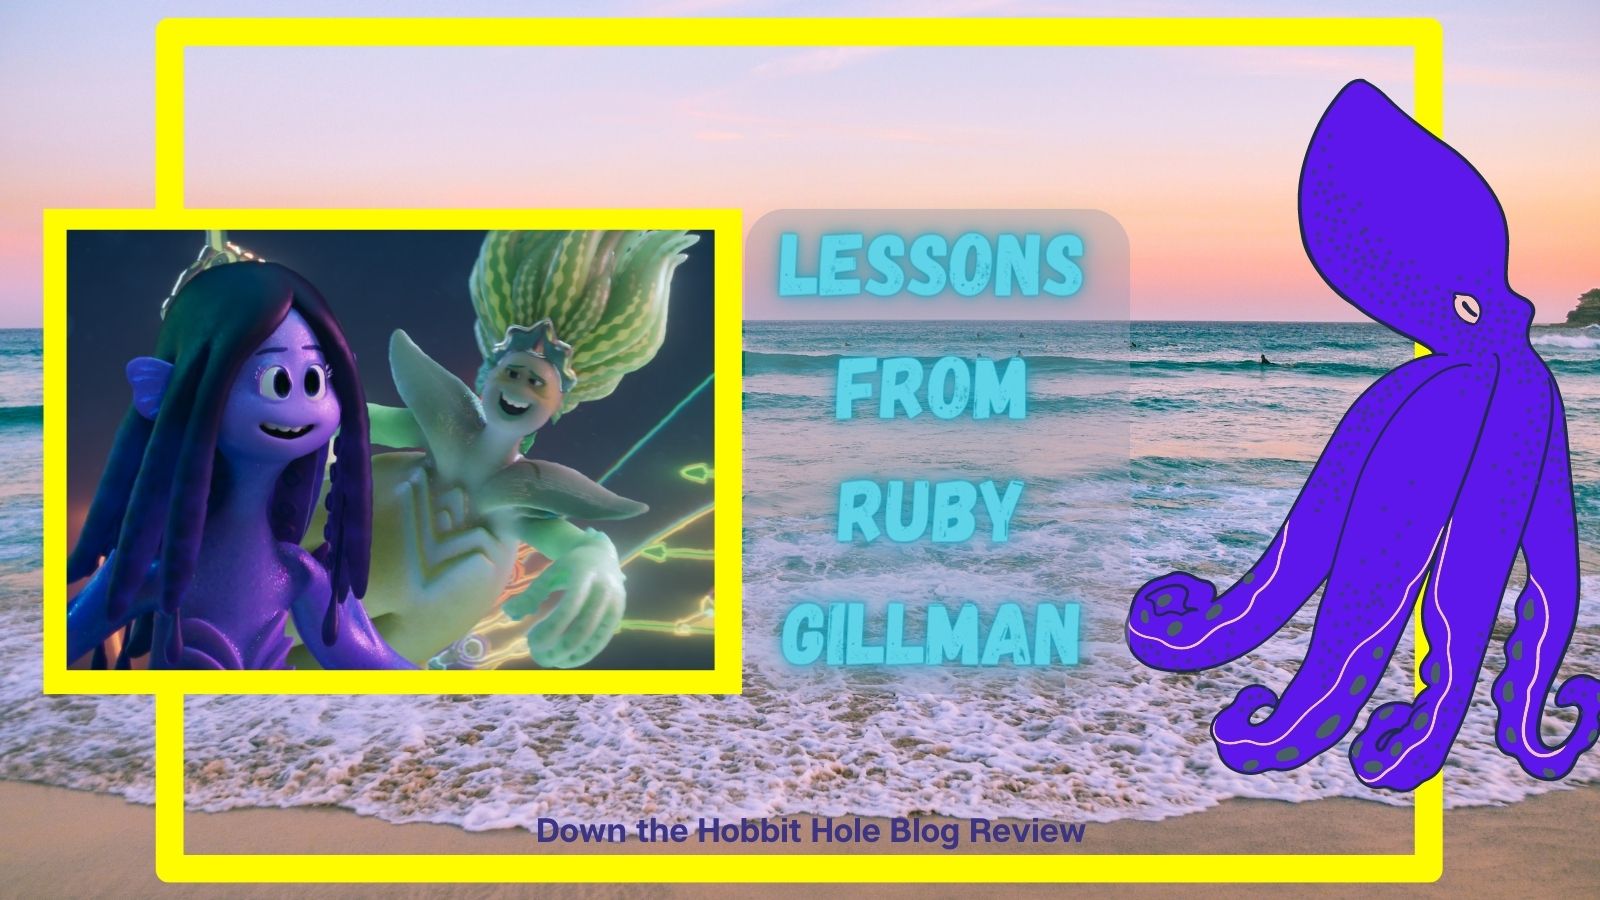 Lessons from Ruby Gillman Teenage Kraken main image with poster and title